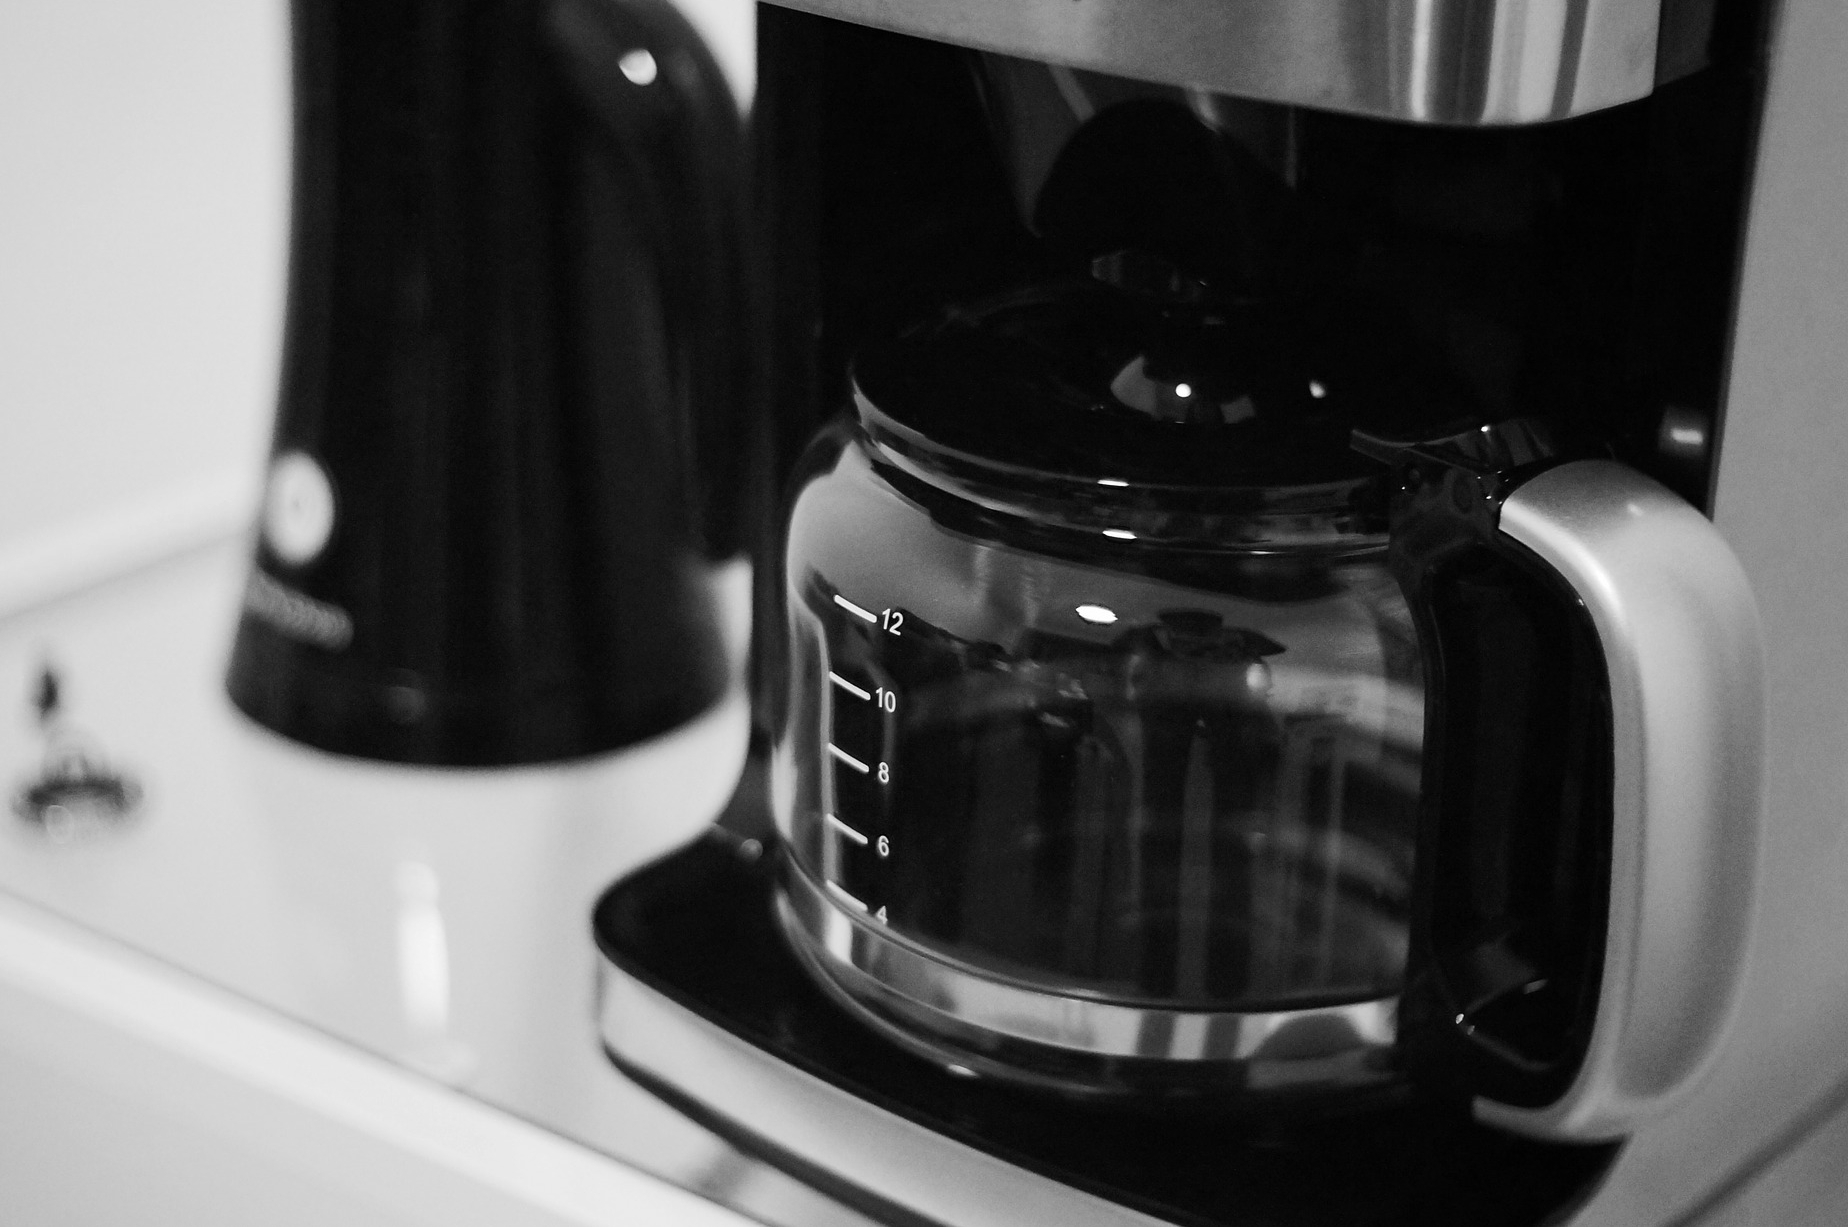 An automatic coffee brewer